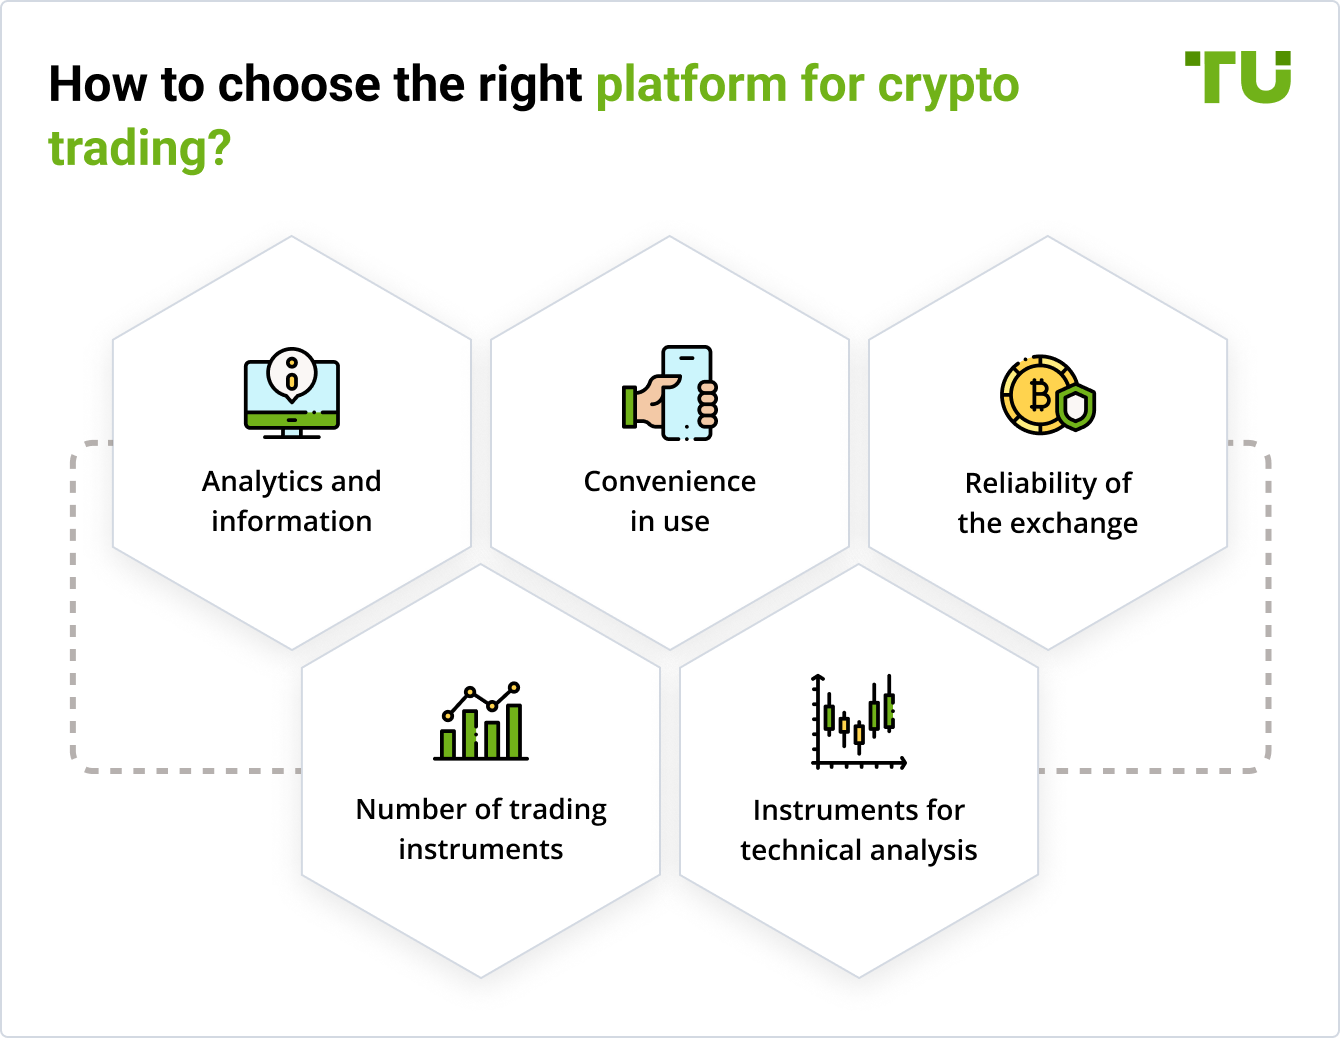 How to choose the right platform for crypto trading?